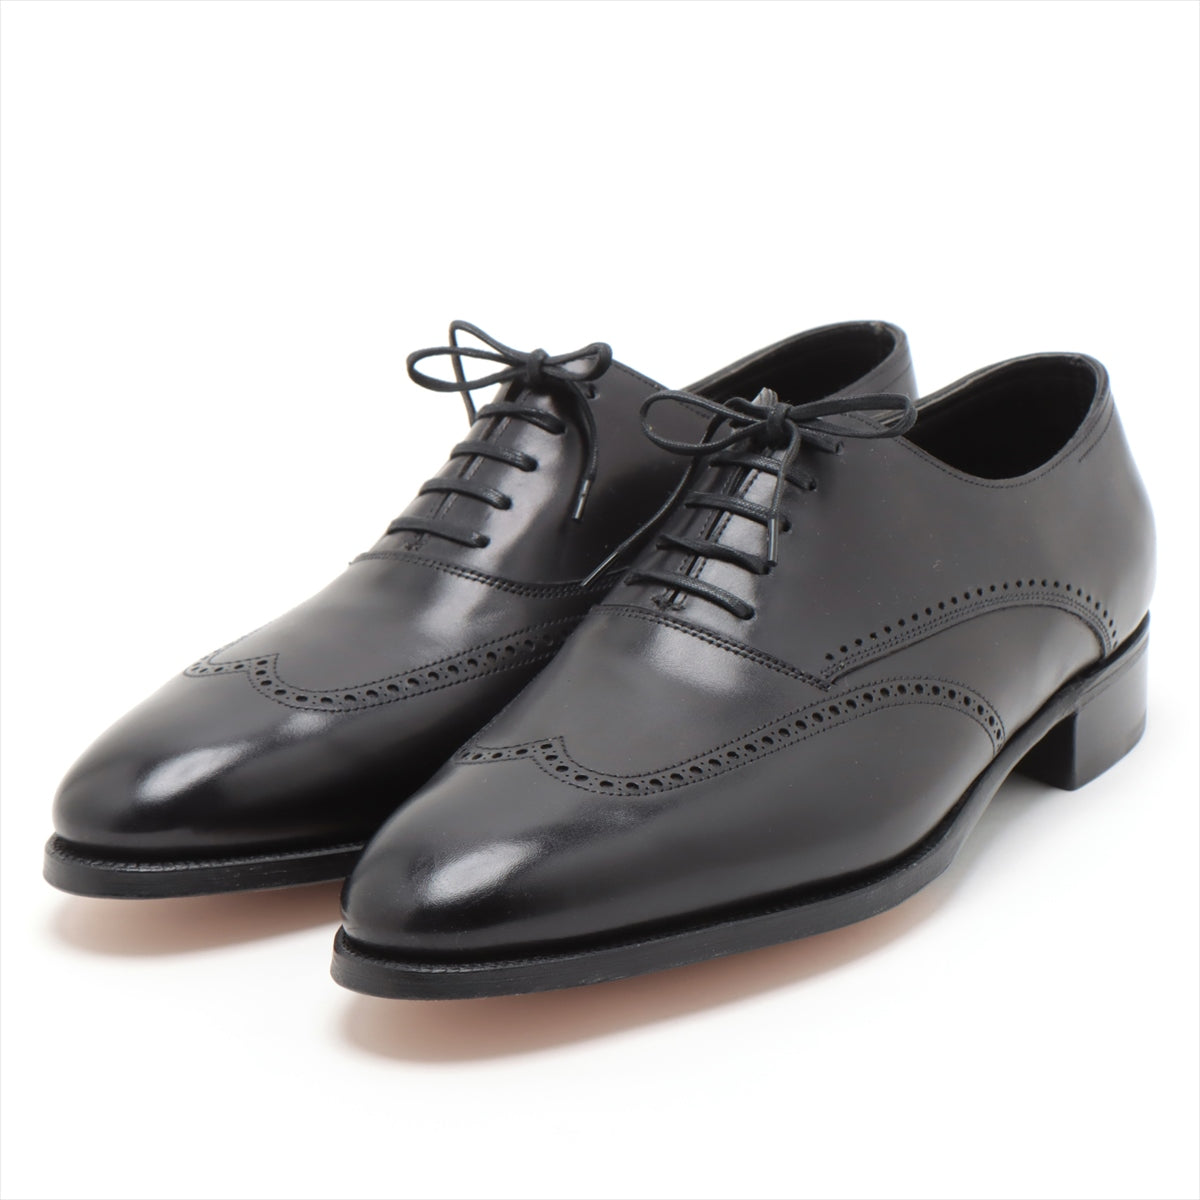 John Lobb Leather Leather shoes 8 Men's Black Comes with genuine shoe keeper